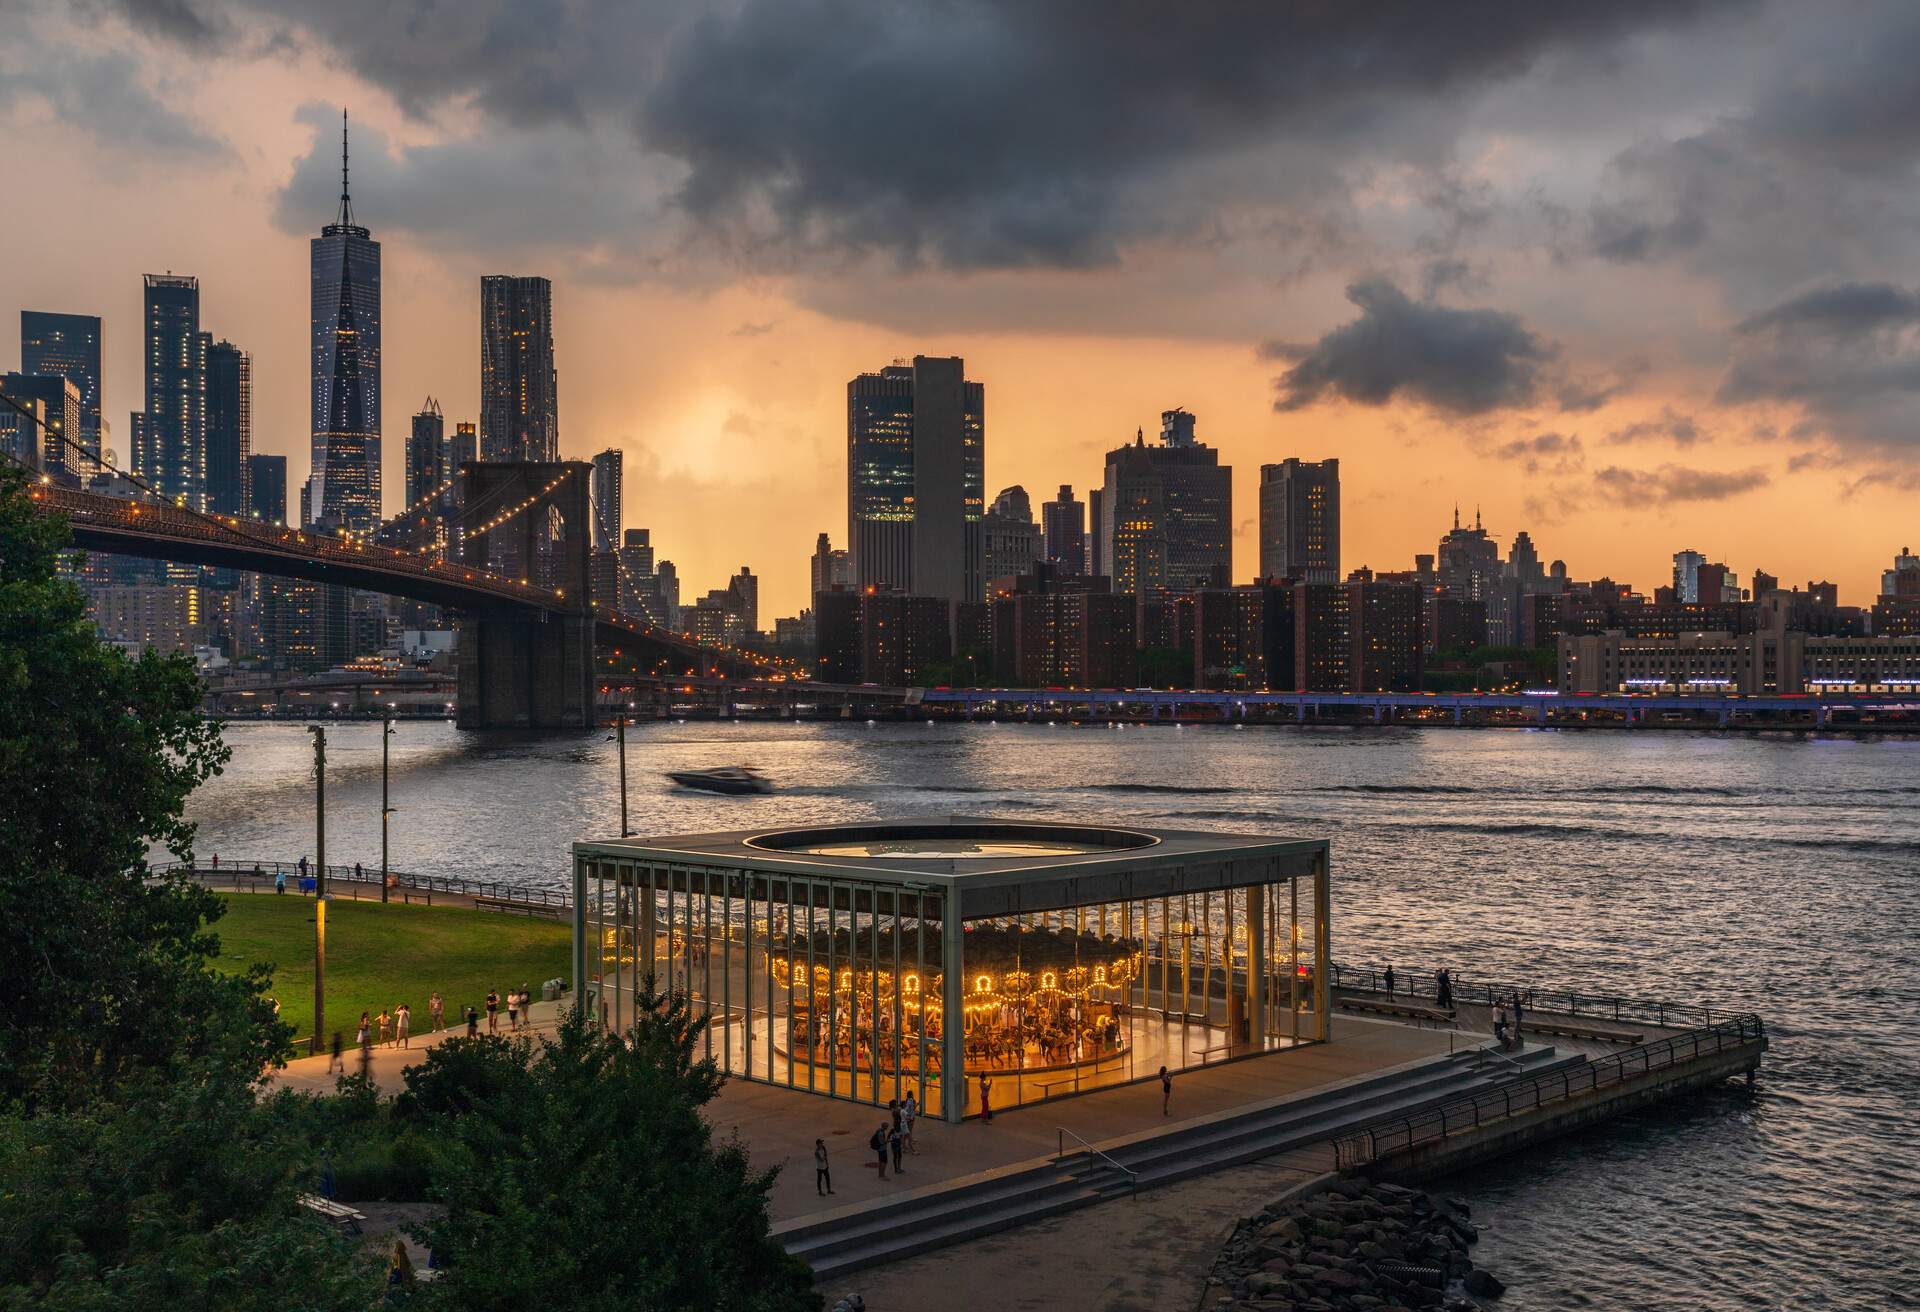 Brooklyn Bridge Park is a waterfront park along the East River in New York City